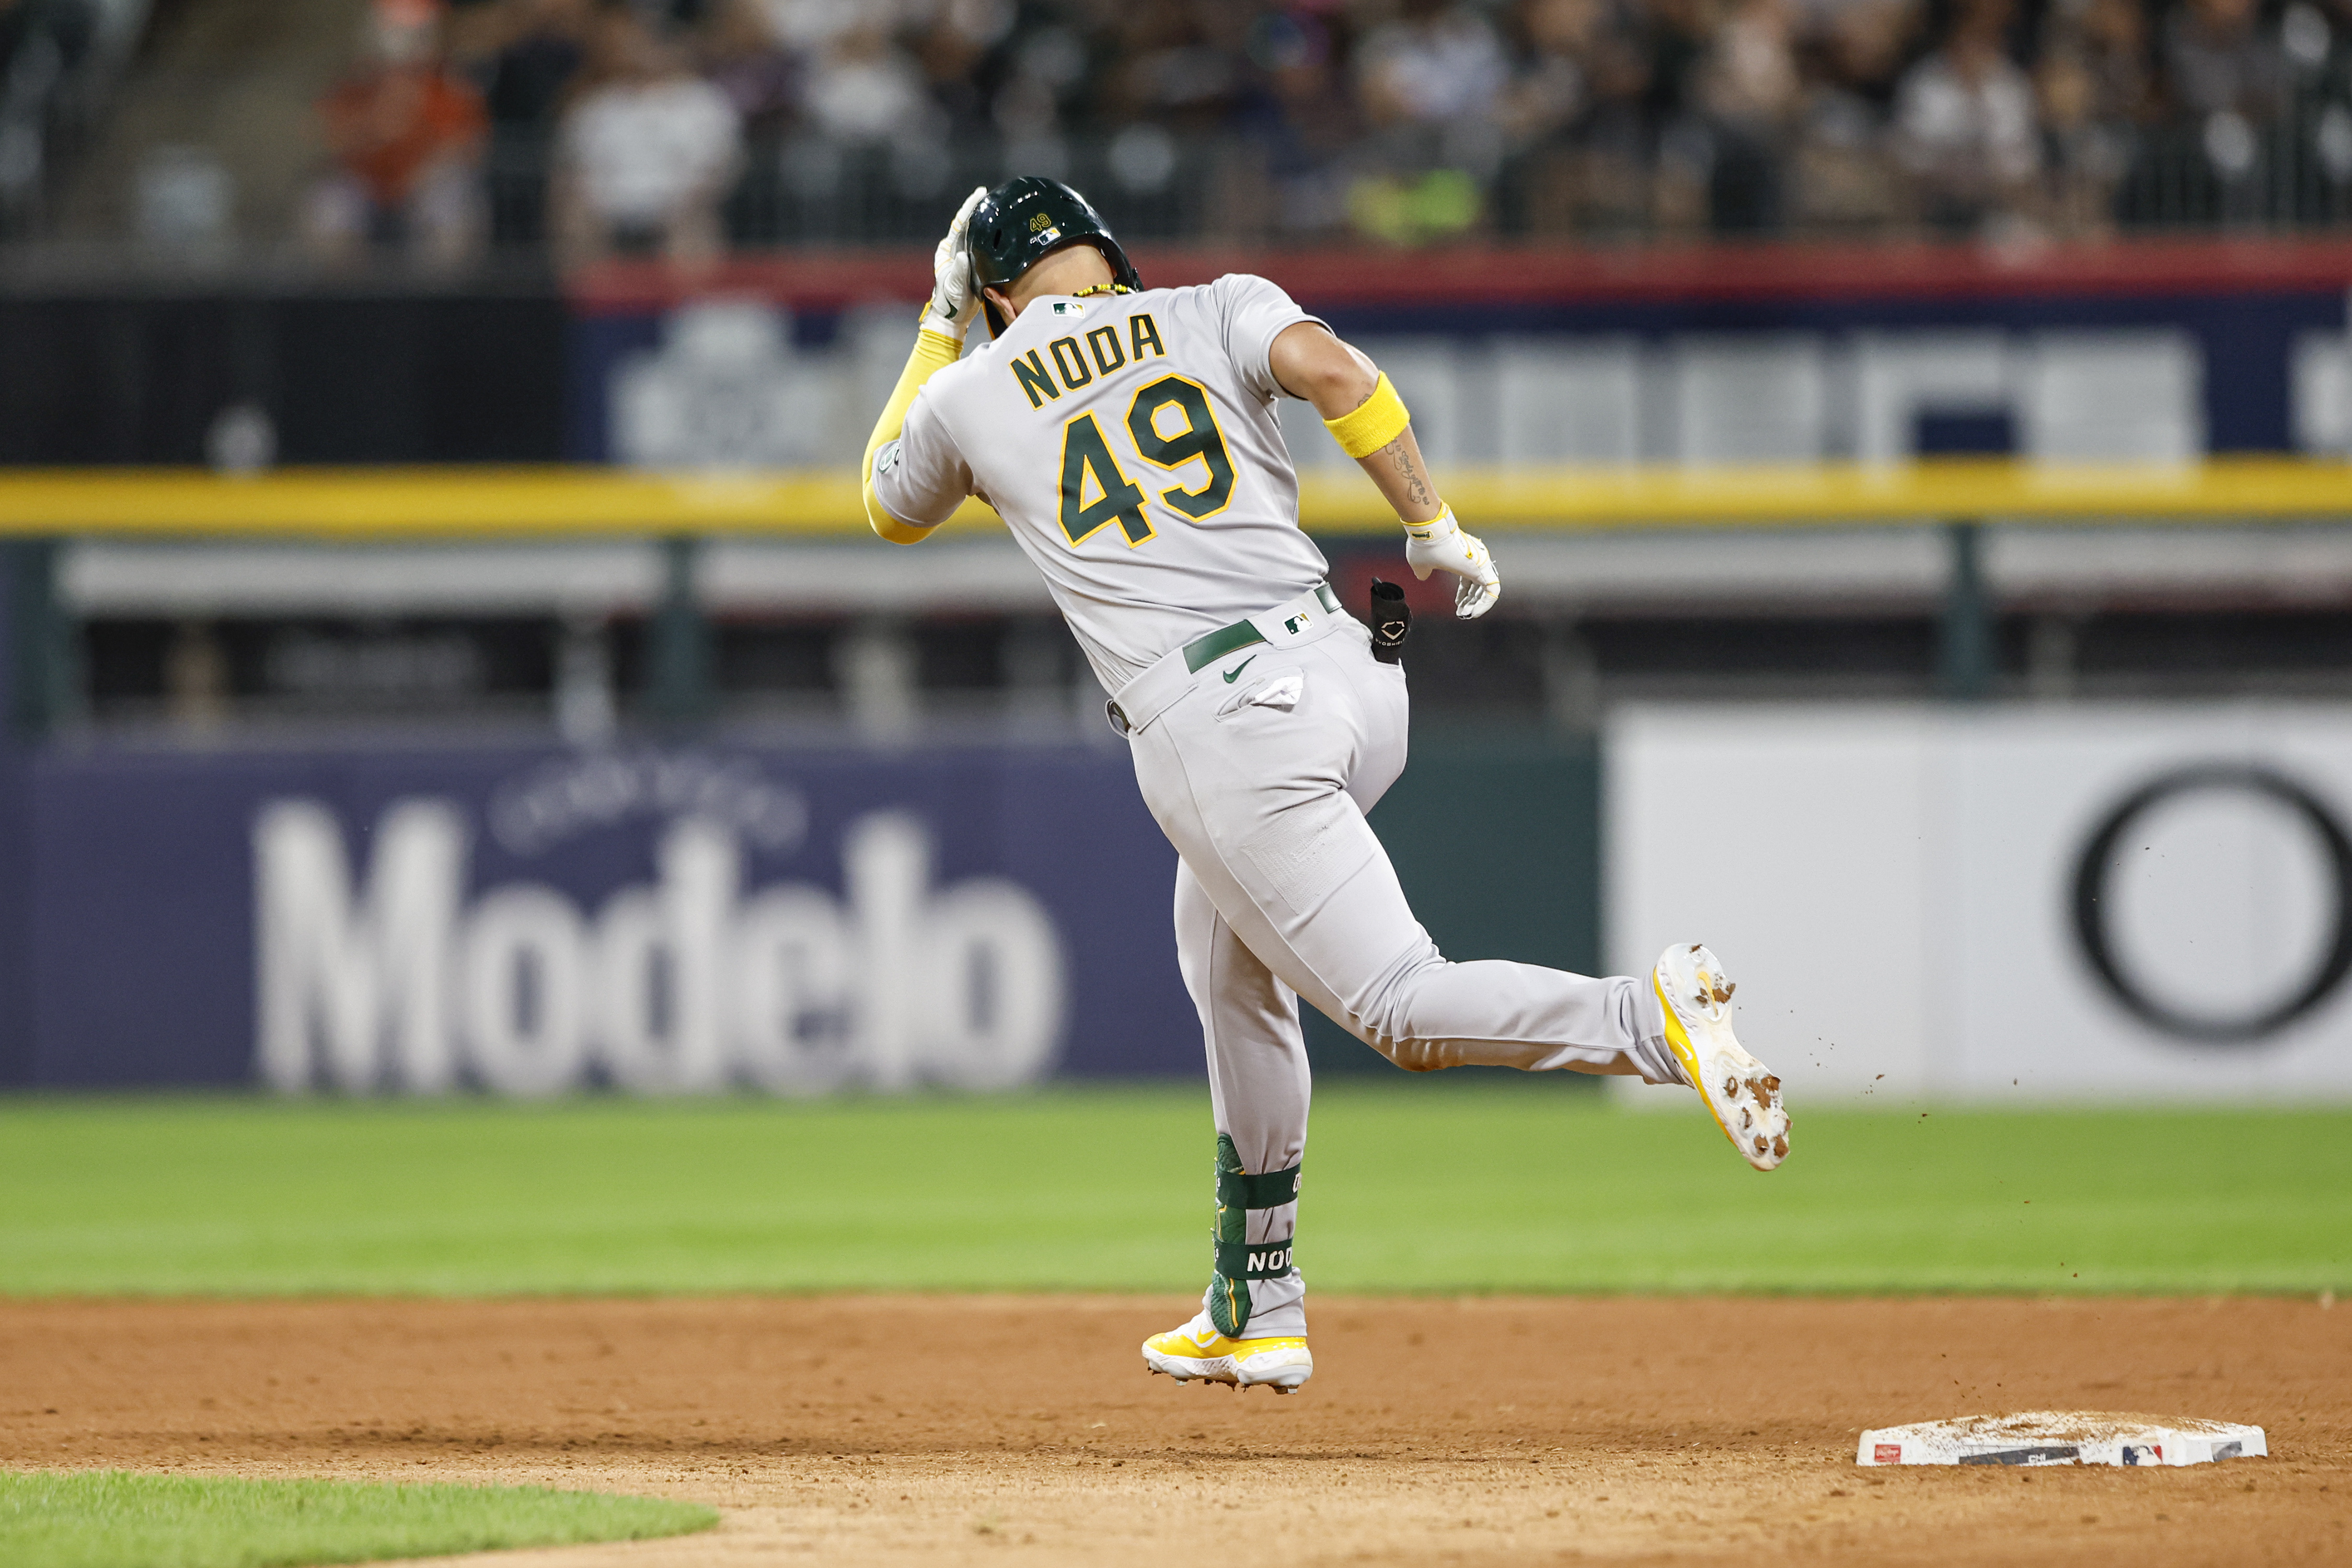 Oakland 68s on X: The @MLB needs to answer for this clear act of